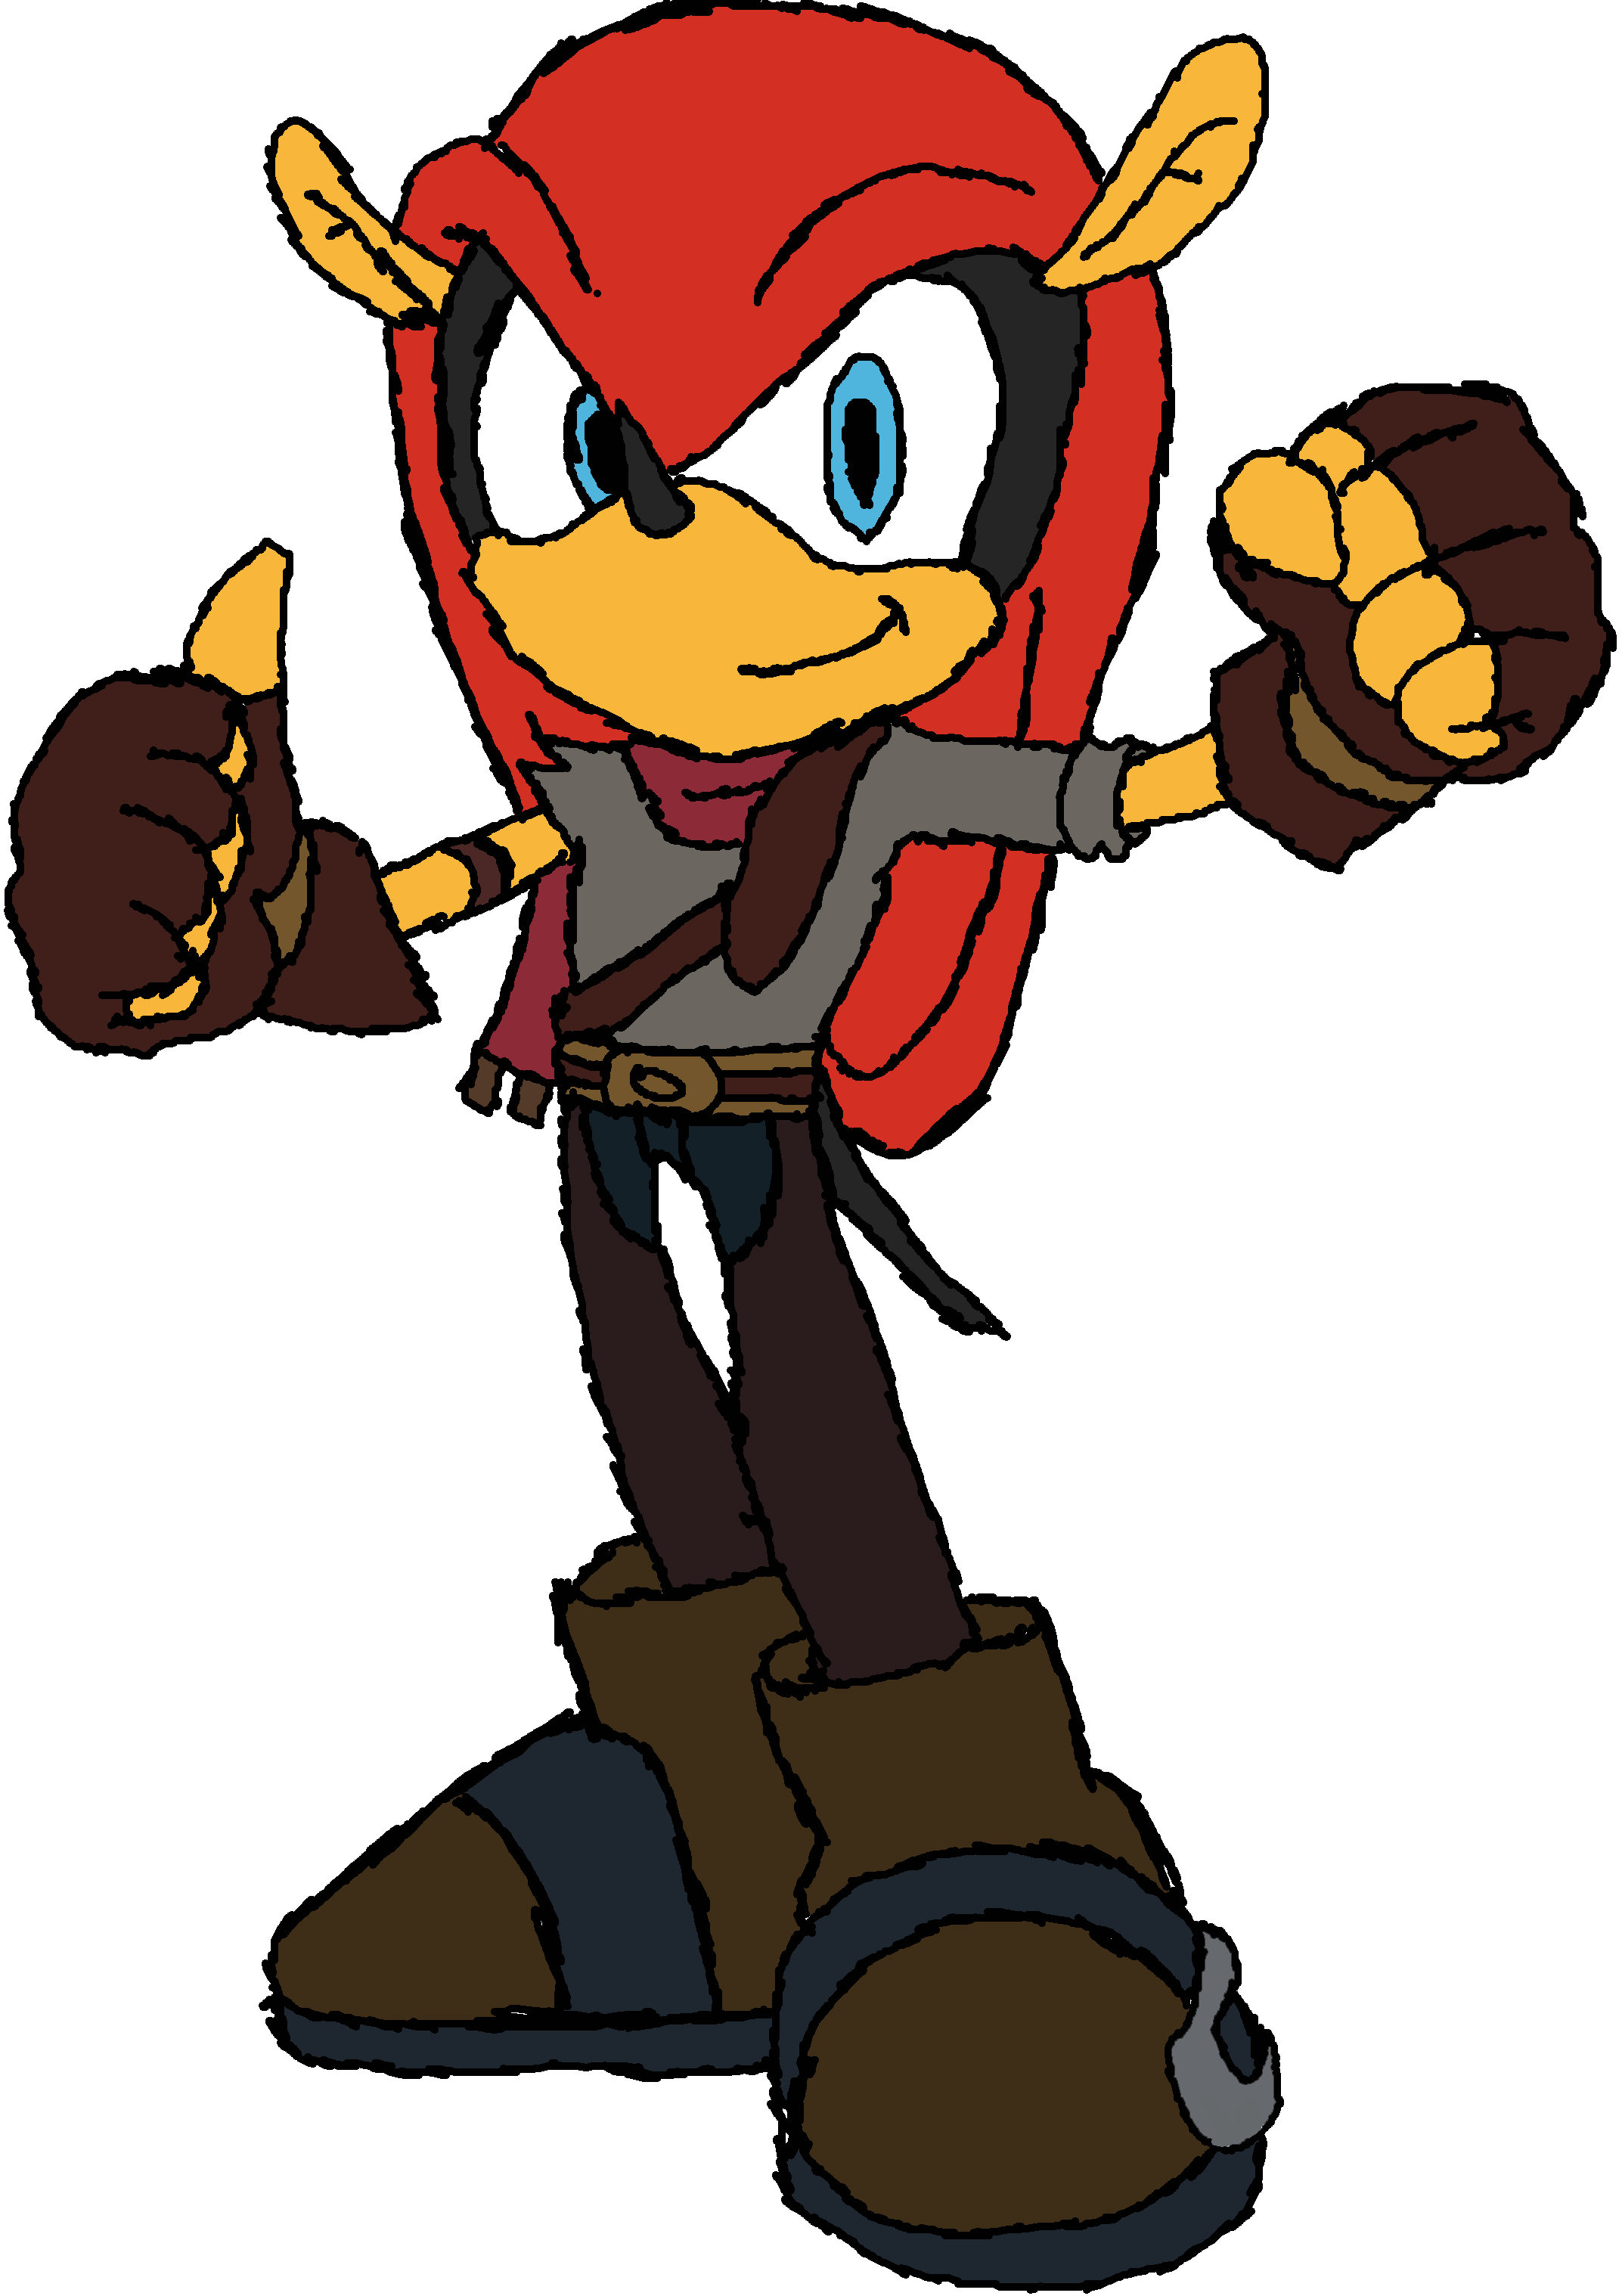 Mighty the Armadillo by INUXI on DeviantArt